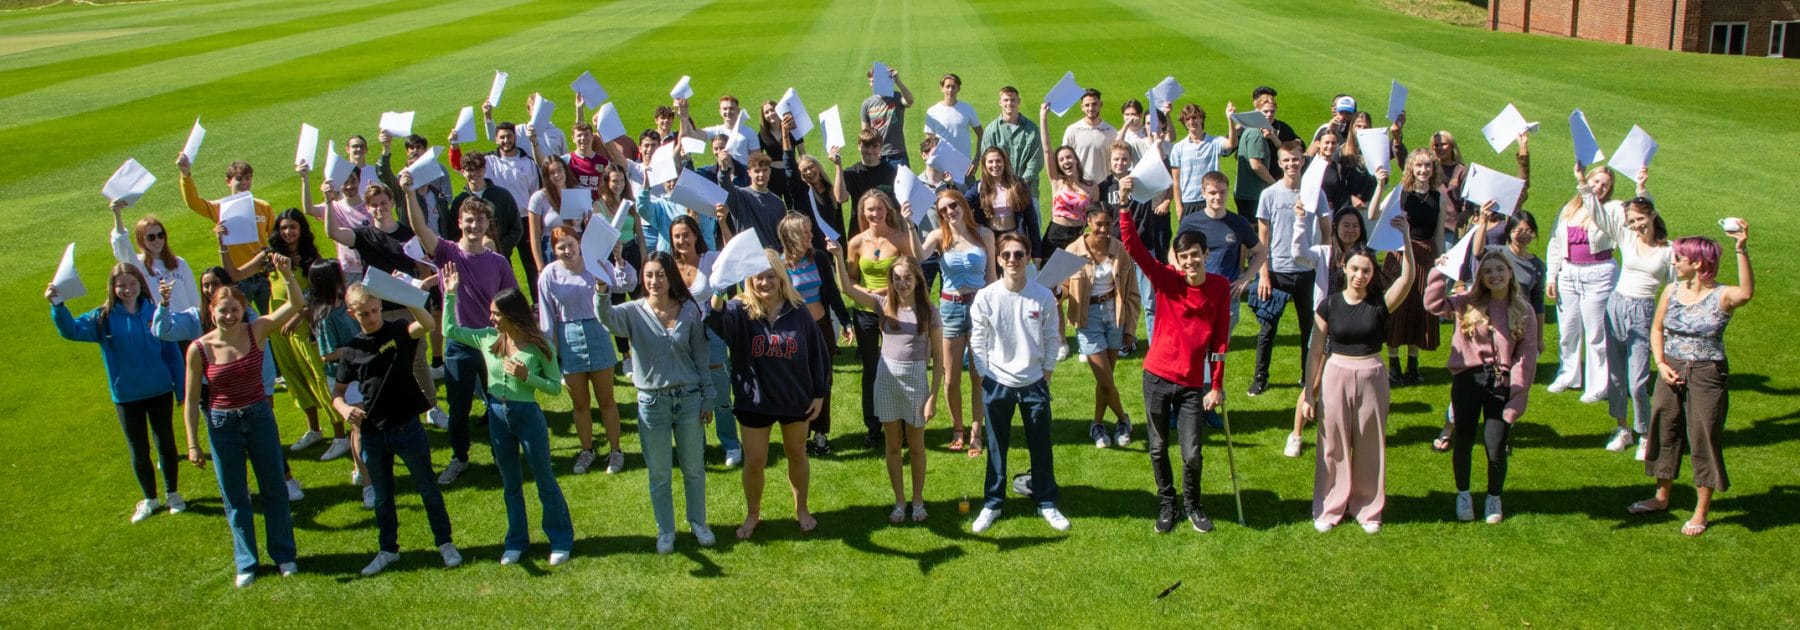 A Level Results Open Doors for Class of 2021